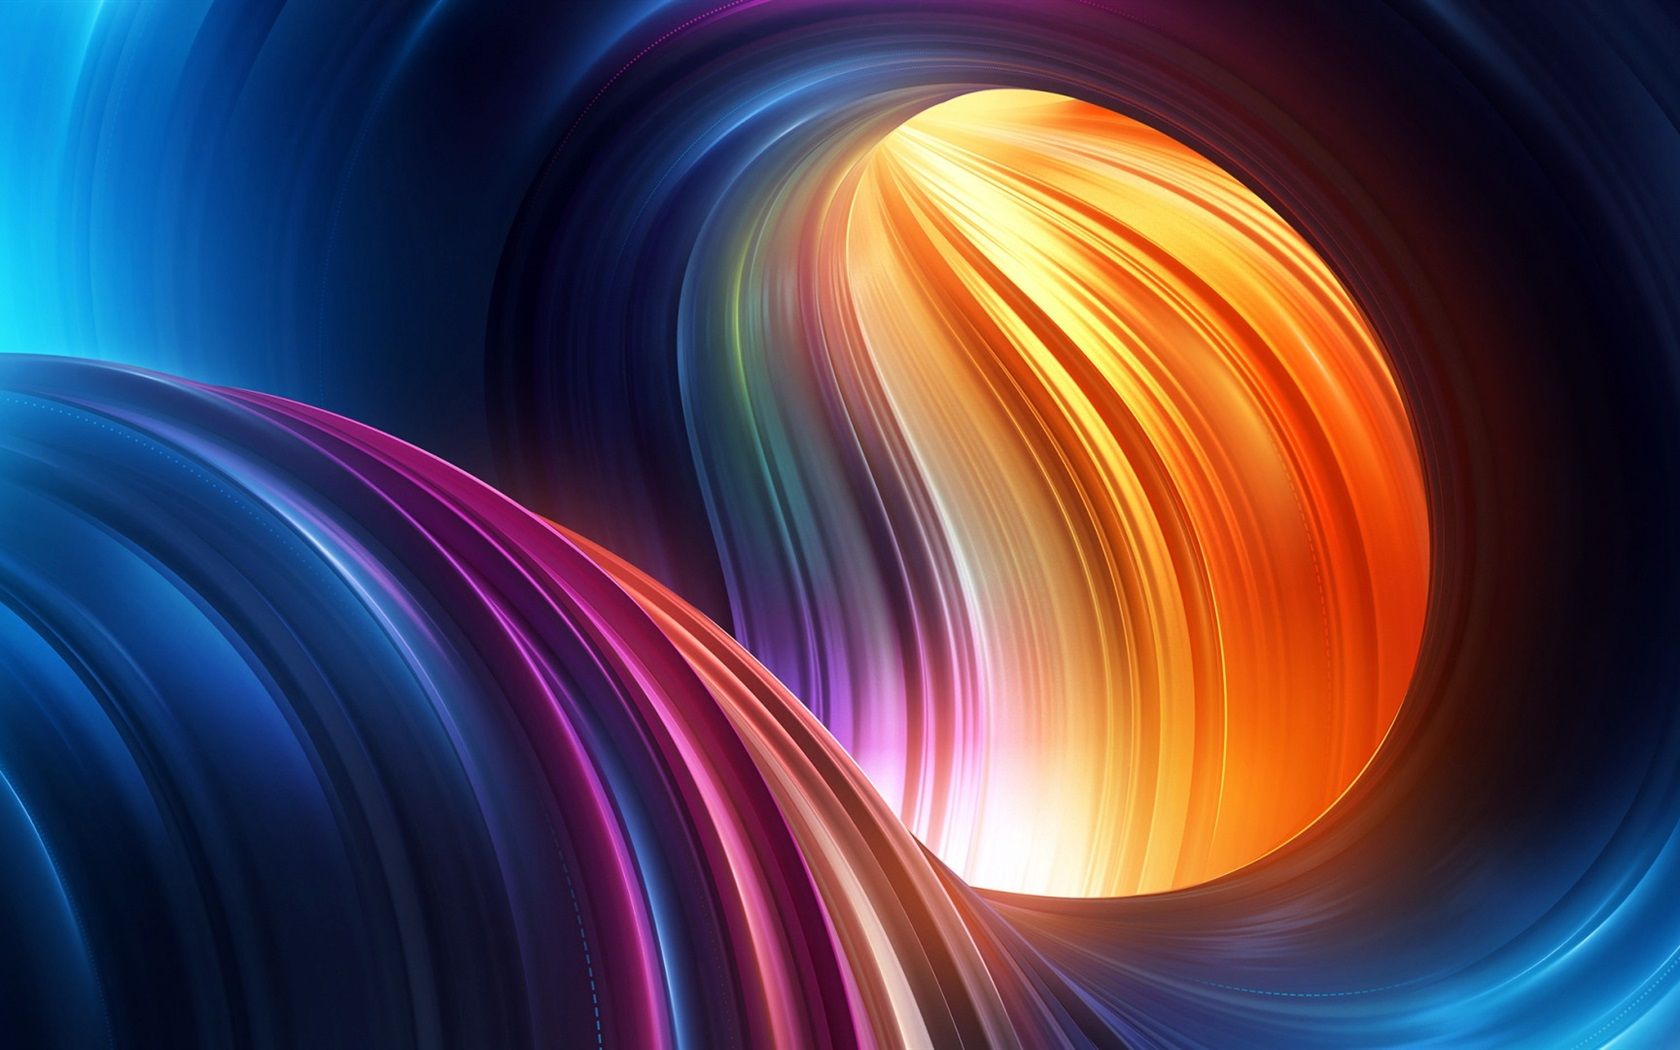 Wallpaper Colorful shape, abstract picture 1920x1080 Full HD 2K Picture, Image